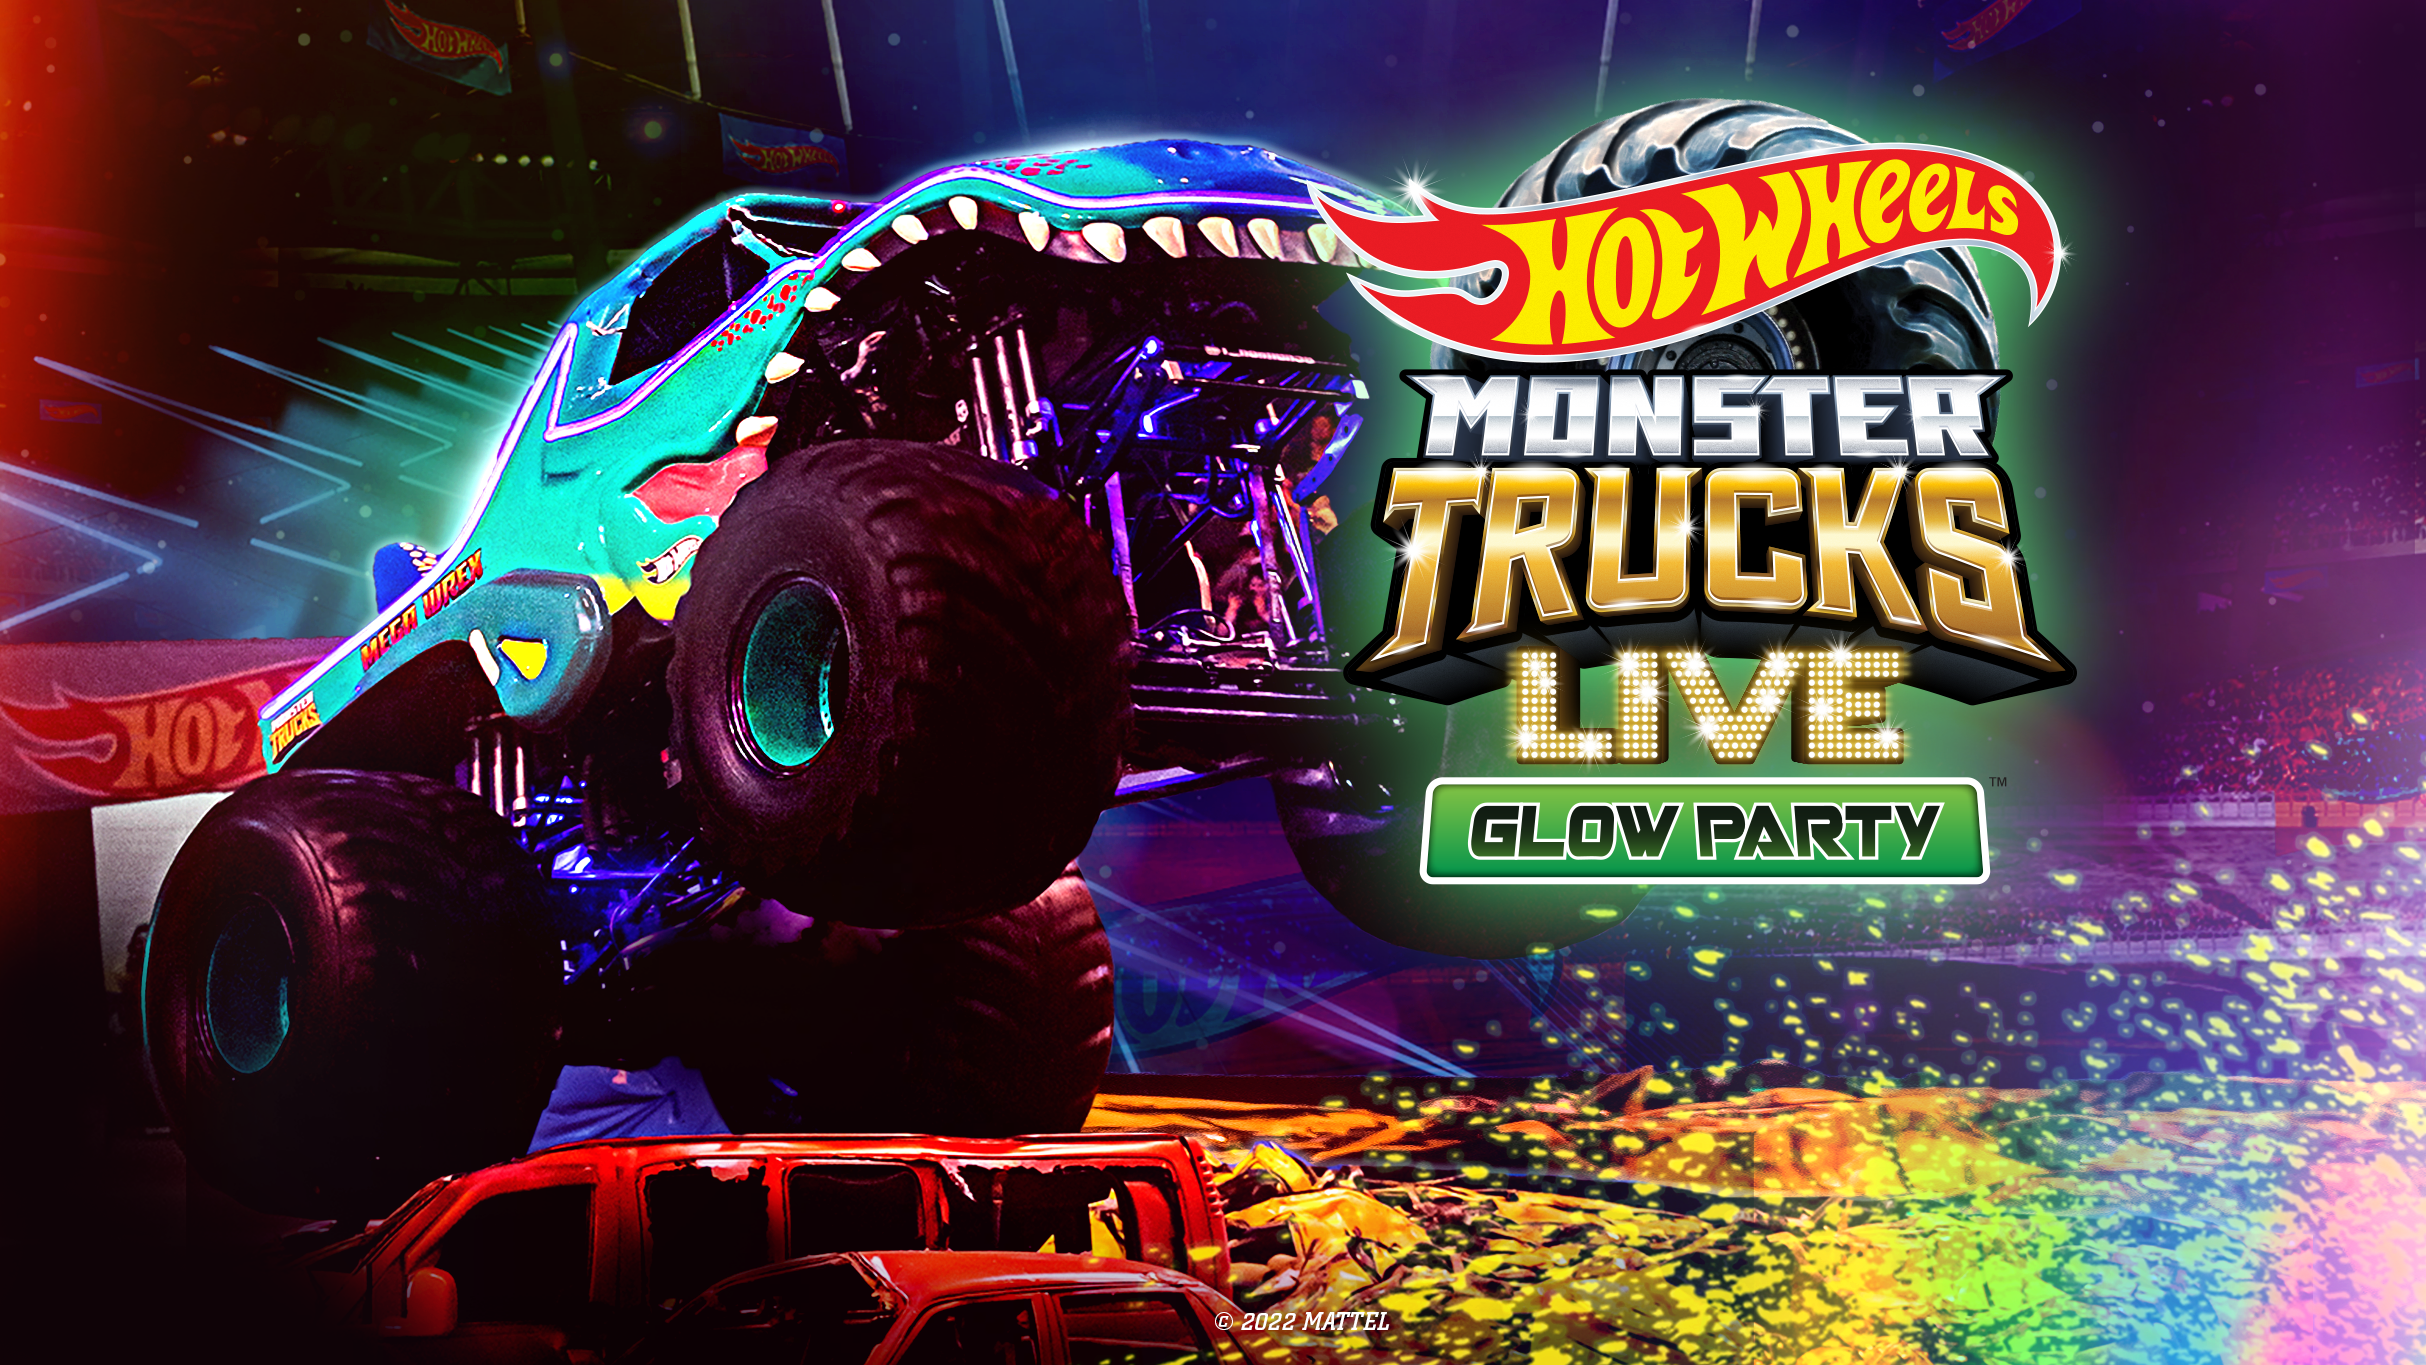 Hot Wheels Monster Trucks Live Glow Party at BOK Center